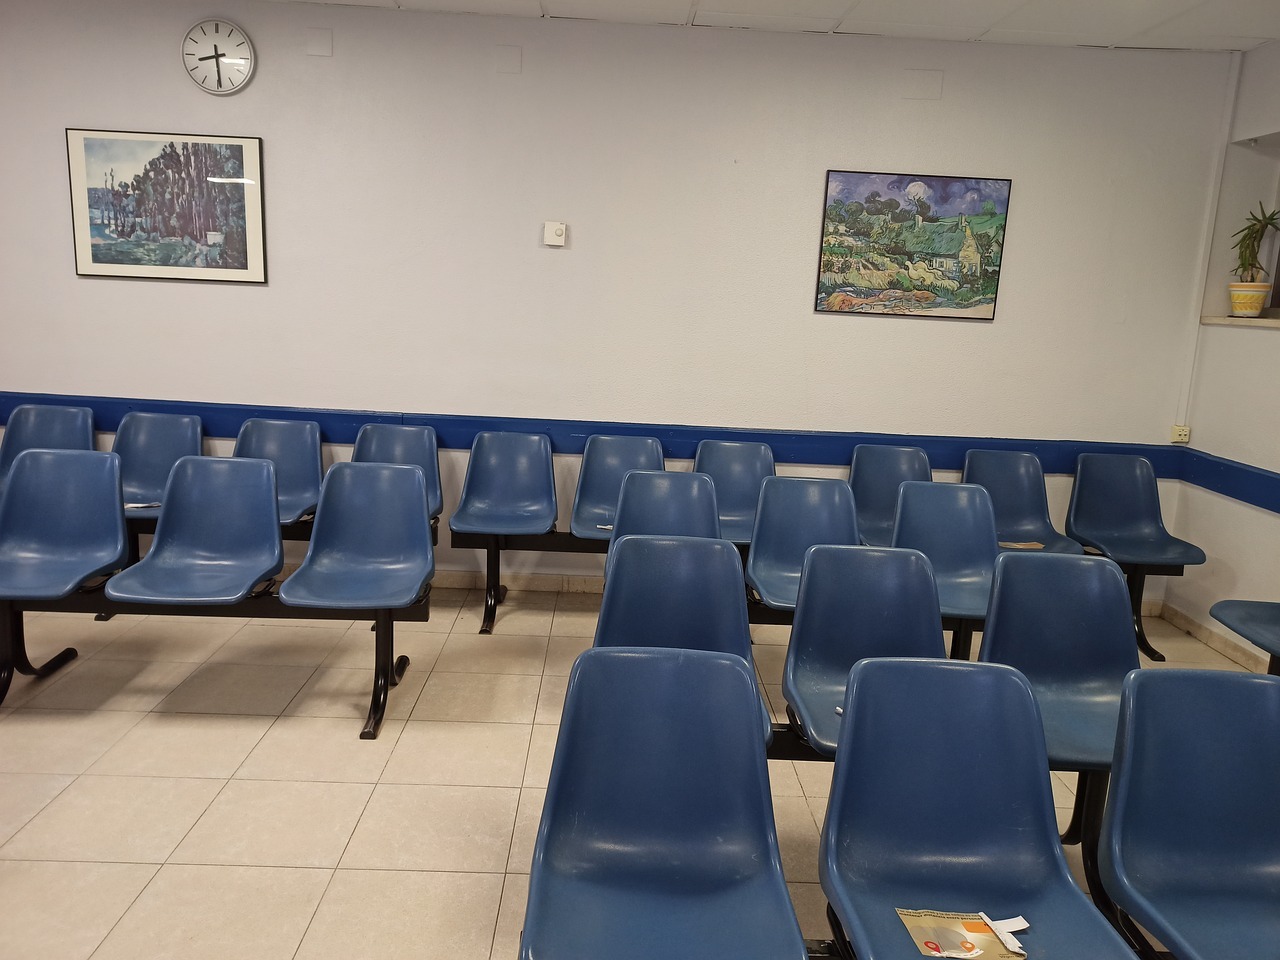 How to Keep Patients Happy in a Waiting Room